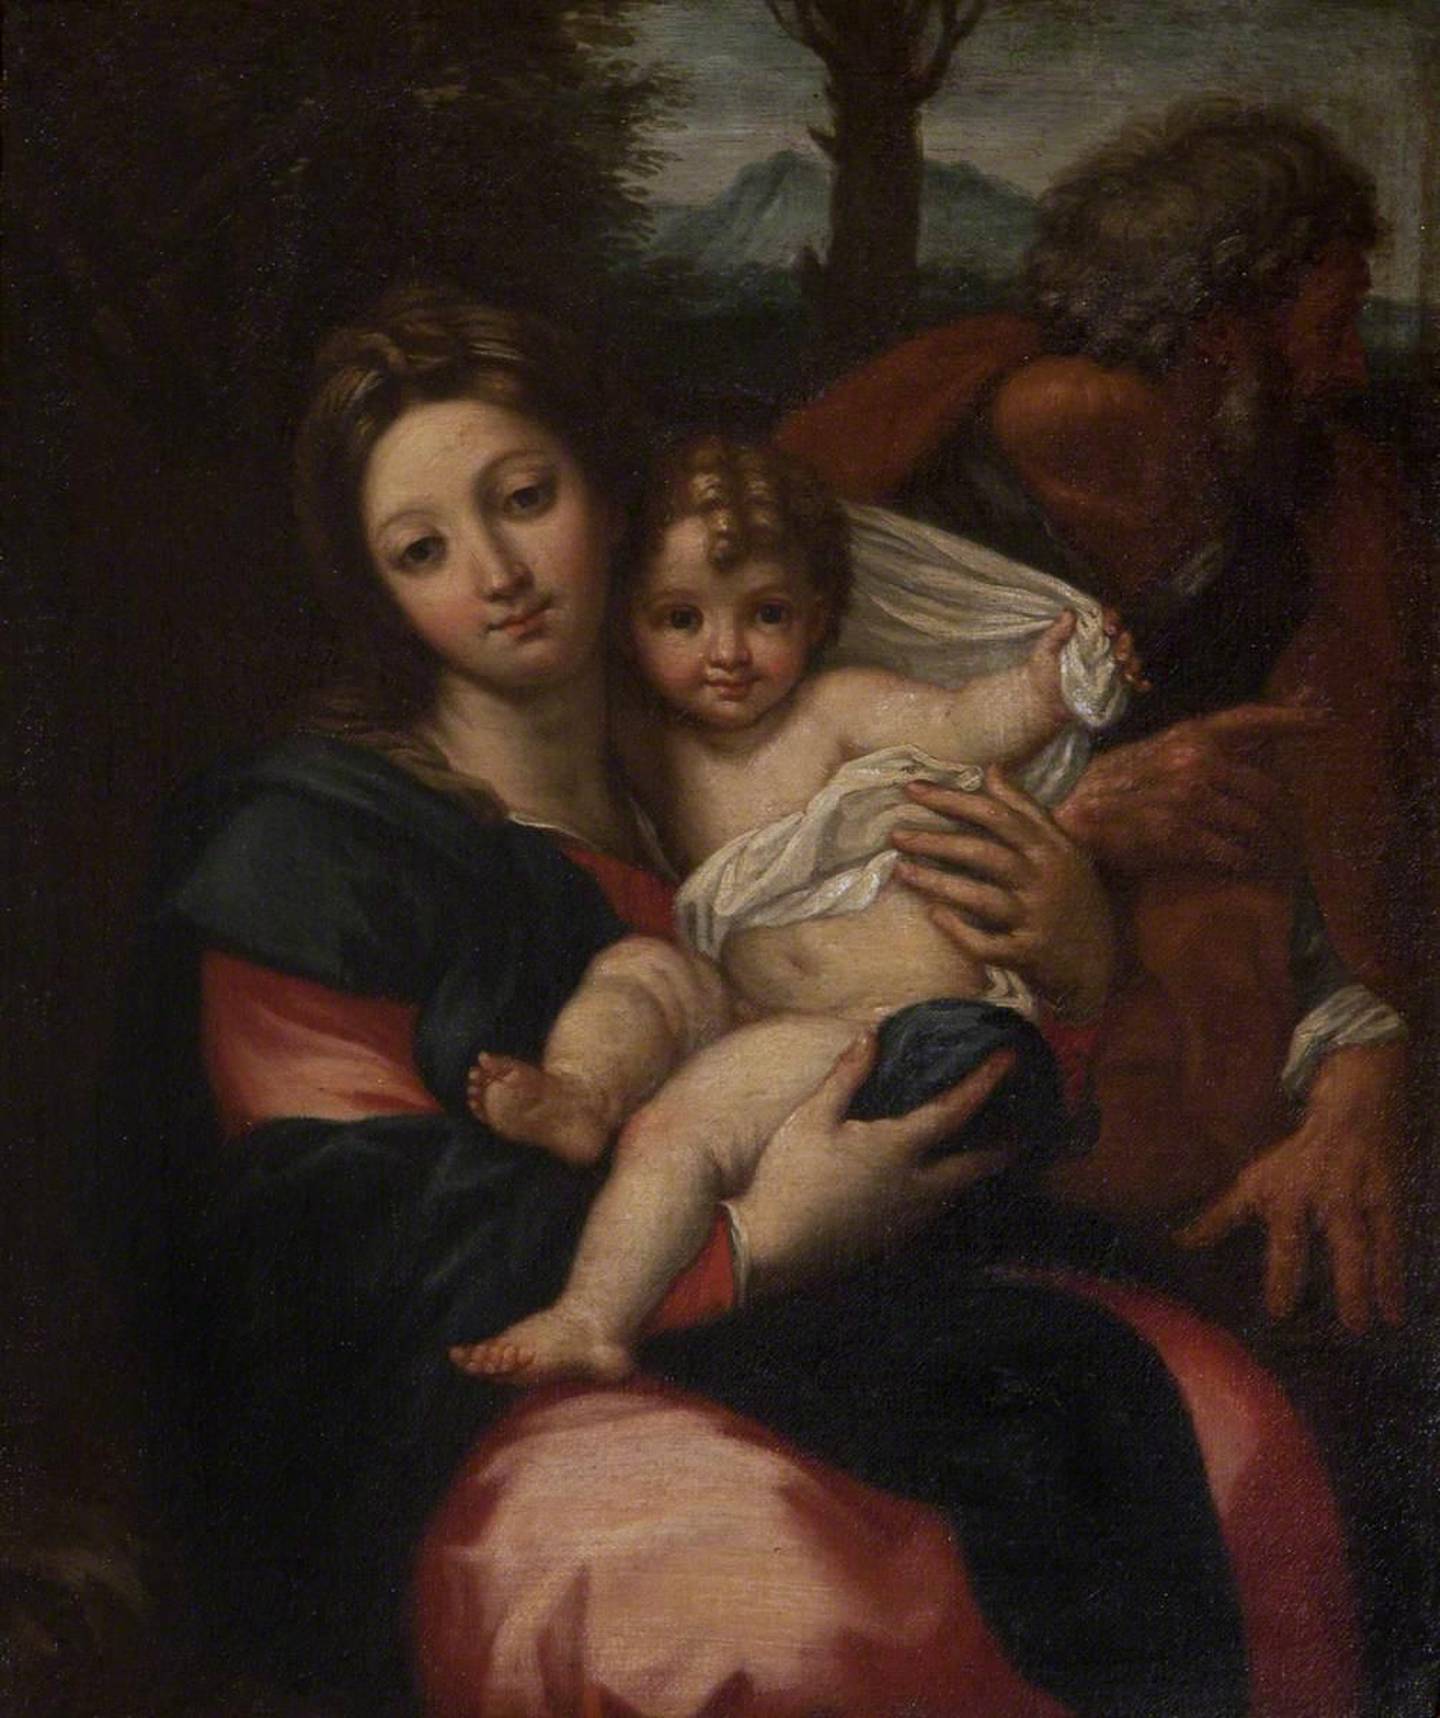 Maratta, Carlo; The Holy Family; National Trust, Kedleston Hall and Eastern Museum; http://www.artuk.org/artworks/the-holy-family-172128